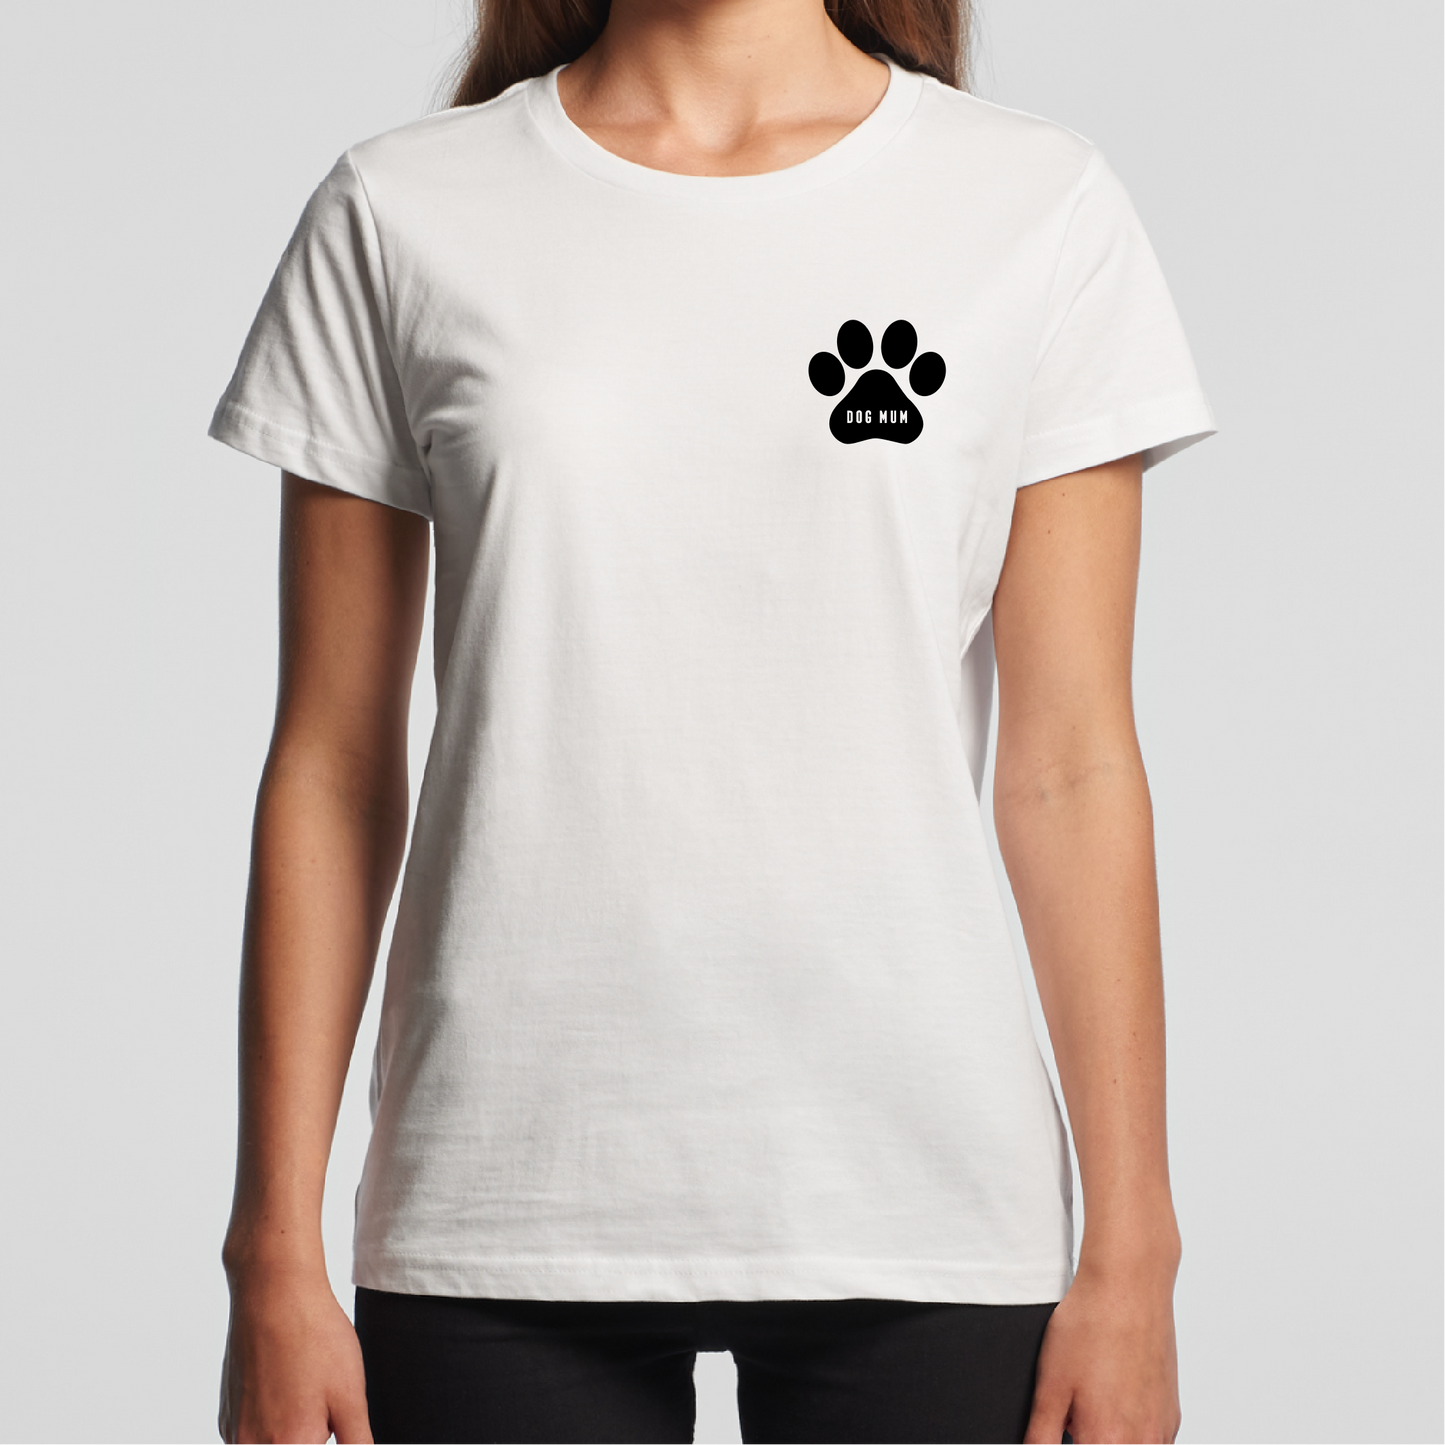 Women's Tee with Back Print